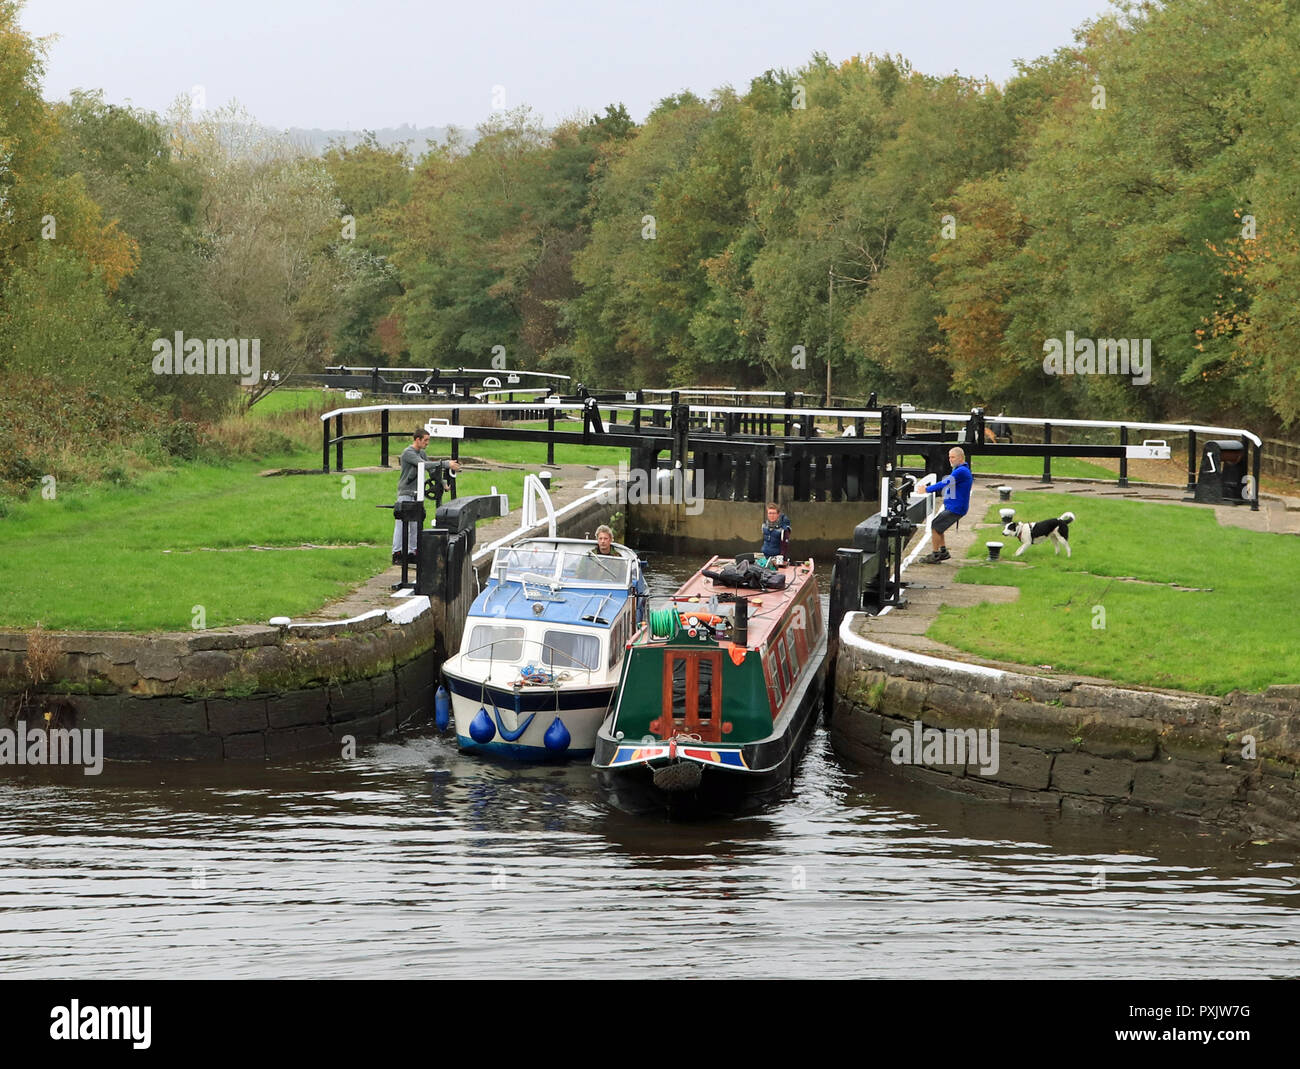 Leeds and Liverpool canal reopens, Wigan, England Wigan, Lancashire. 23rd October 2018. Two canal boats are leaving lock 74 on the long flight of locks up from Wigan to Aspull on The Leeds and Liverpool canal. This steel narrow boat and fibre glass cruiser where some of the 1st boats to ascend the flight of 21 locks following the reopening the previous afternoon.  The locks where closed back in July following the prolonged dry spell of weather in the spring and summer that meant the reservoirs that feed water to the canal became depleted of supplies. Cw 6438 Colin Wareing /Alamy Live news. Stock Photo